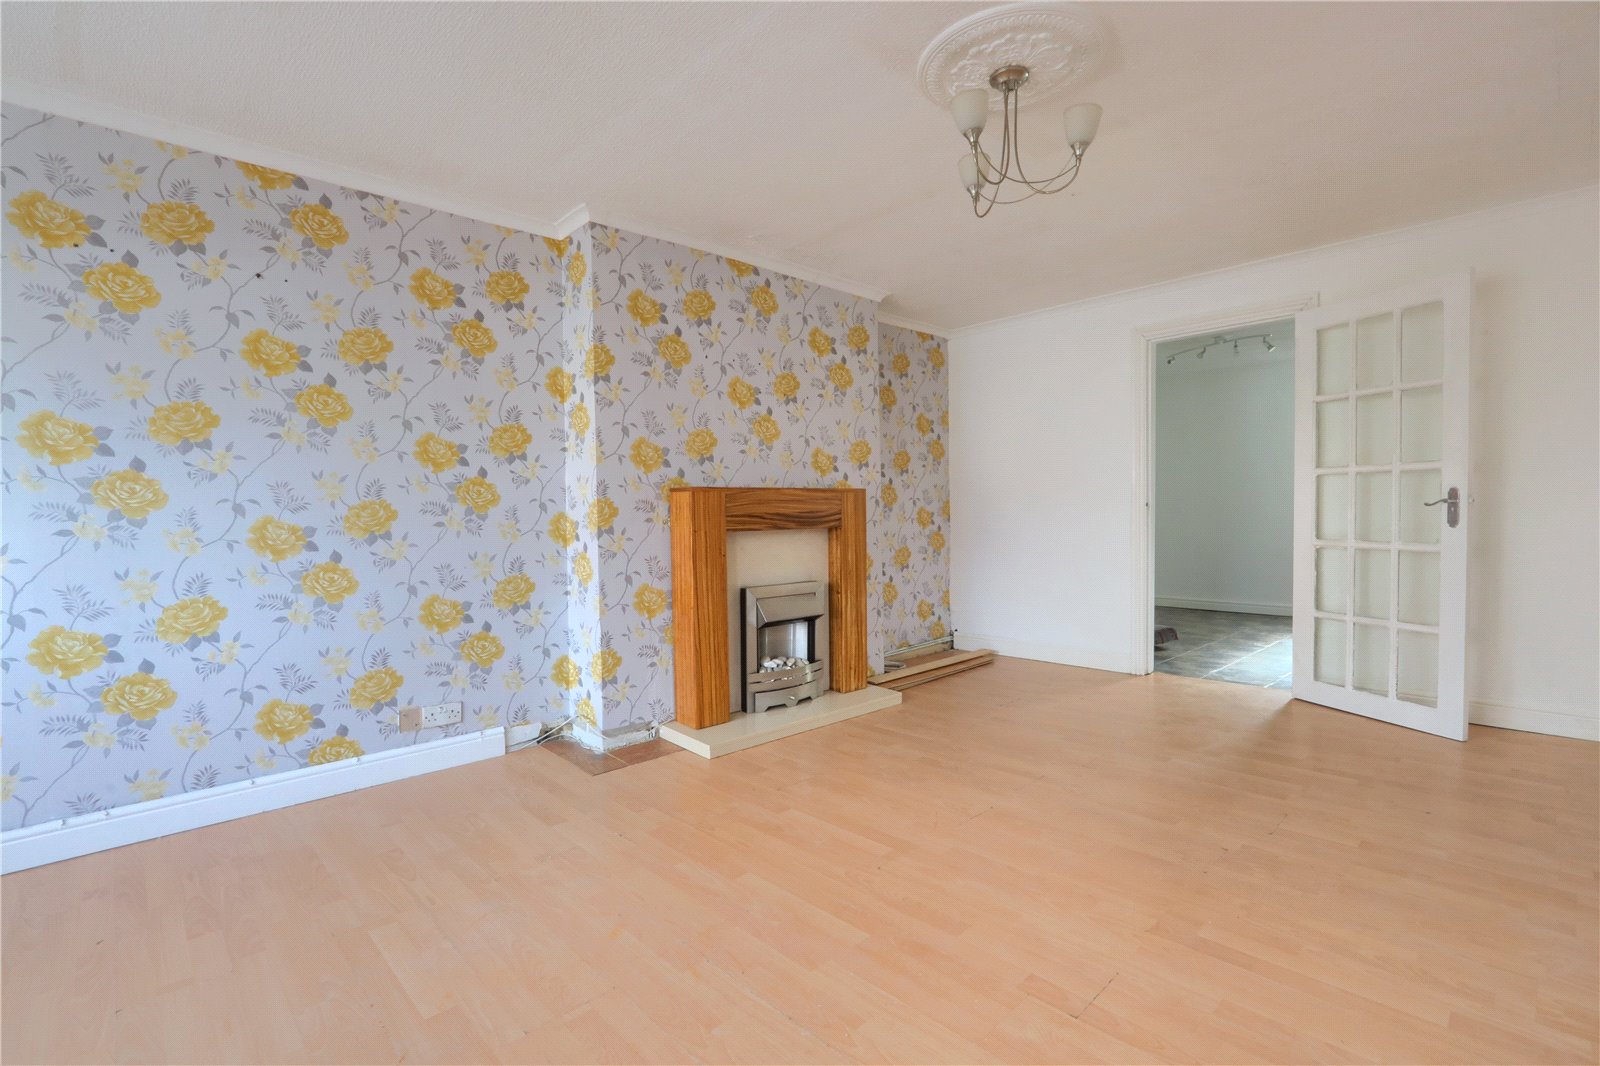 3 bed house for sale in Hambleton Crescent, Marske-by-the-Sea 1